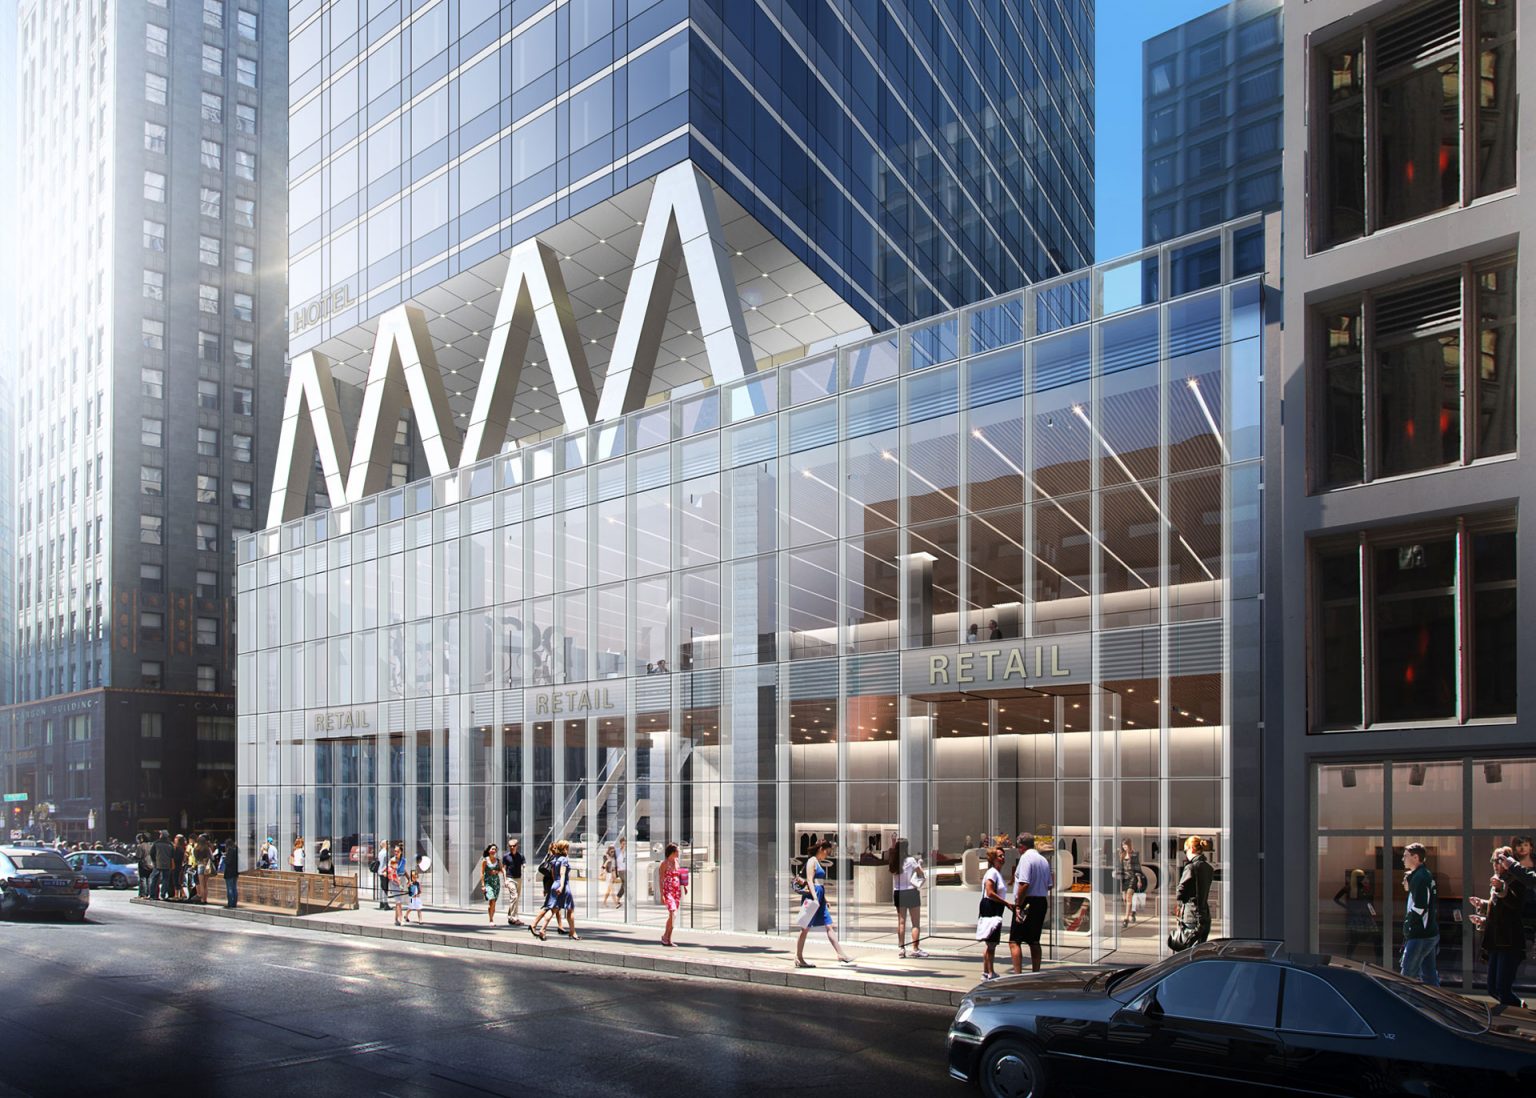 300 N Michigan Tops Out at 47 Stories in The Loop - Chicago YIMBY